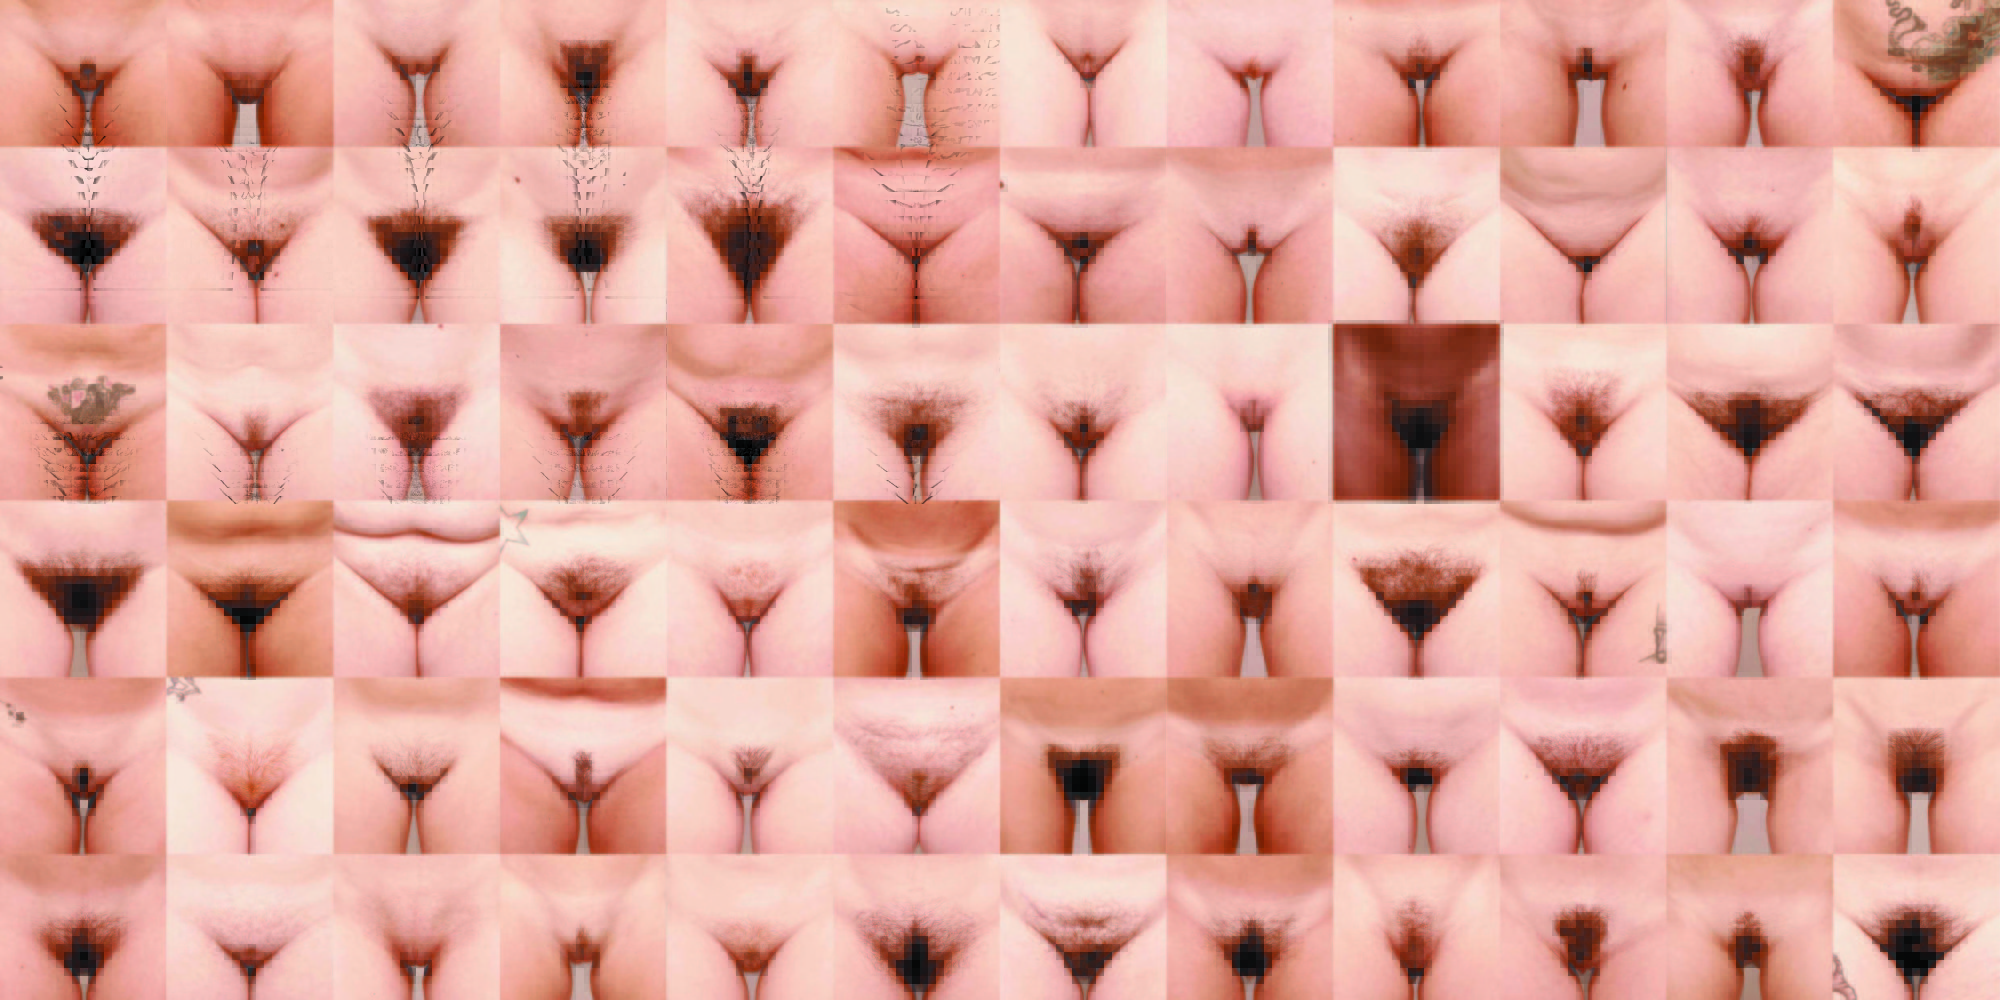 Pictures Of Hairy Vagina 64